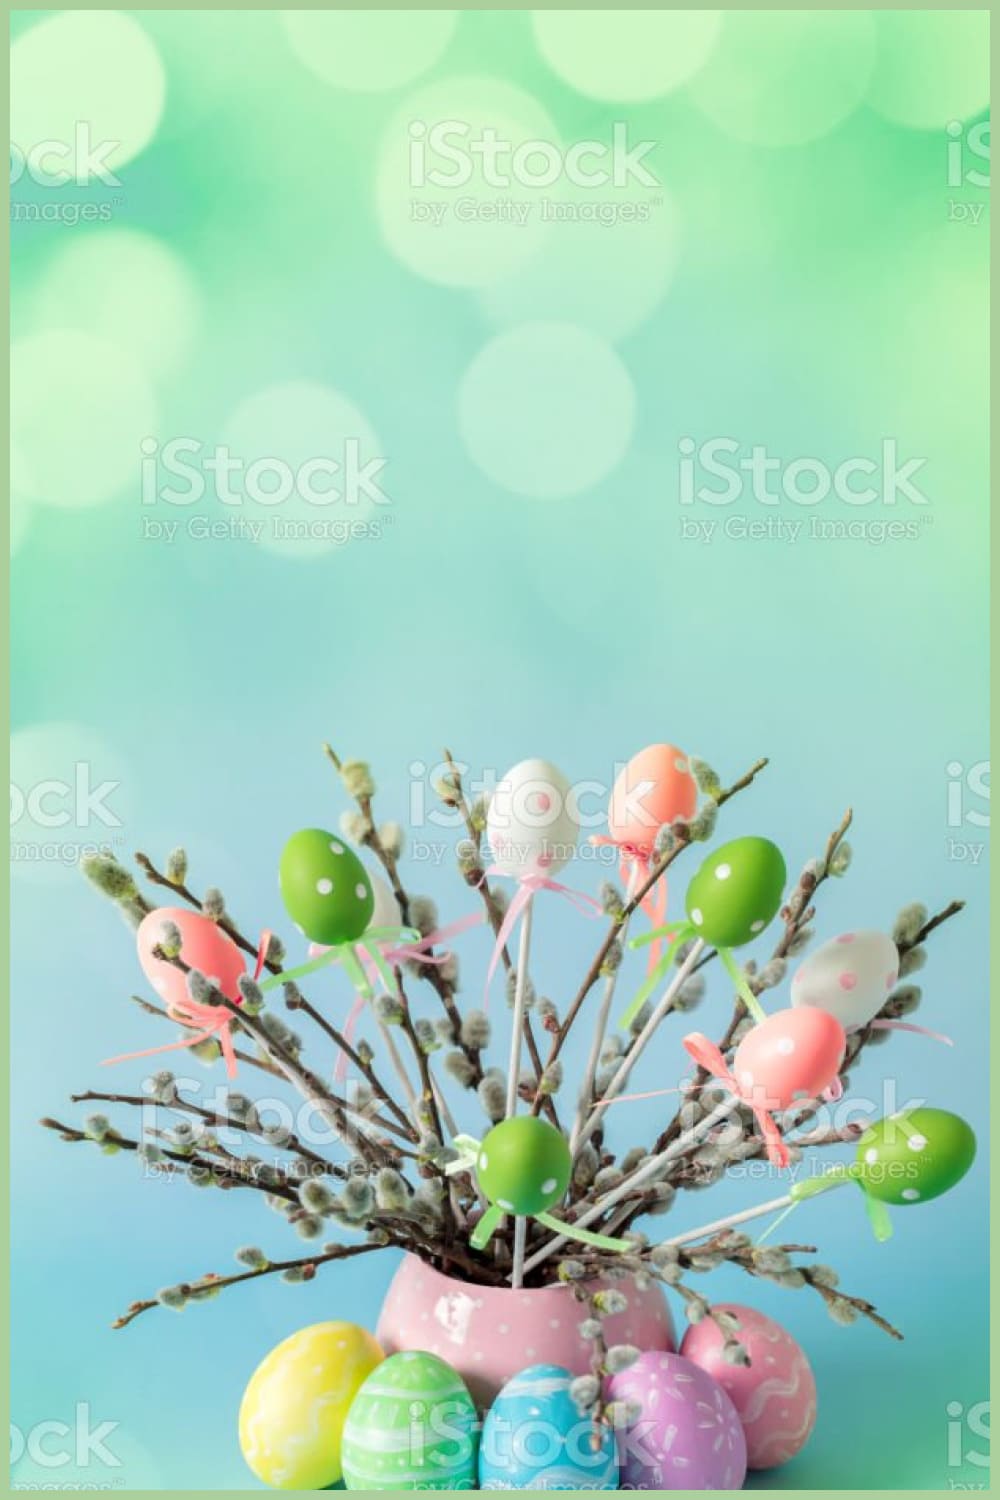 Easter eggs and pussy willow twigs with catkins in a vase stock photo.